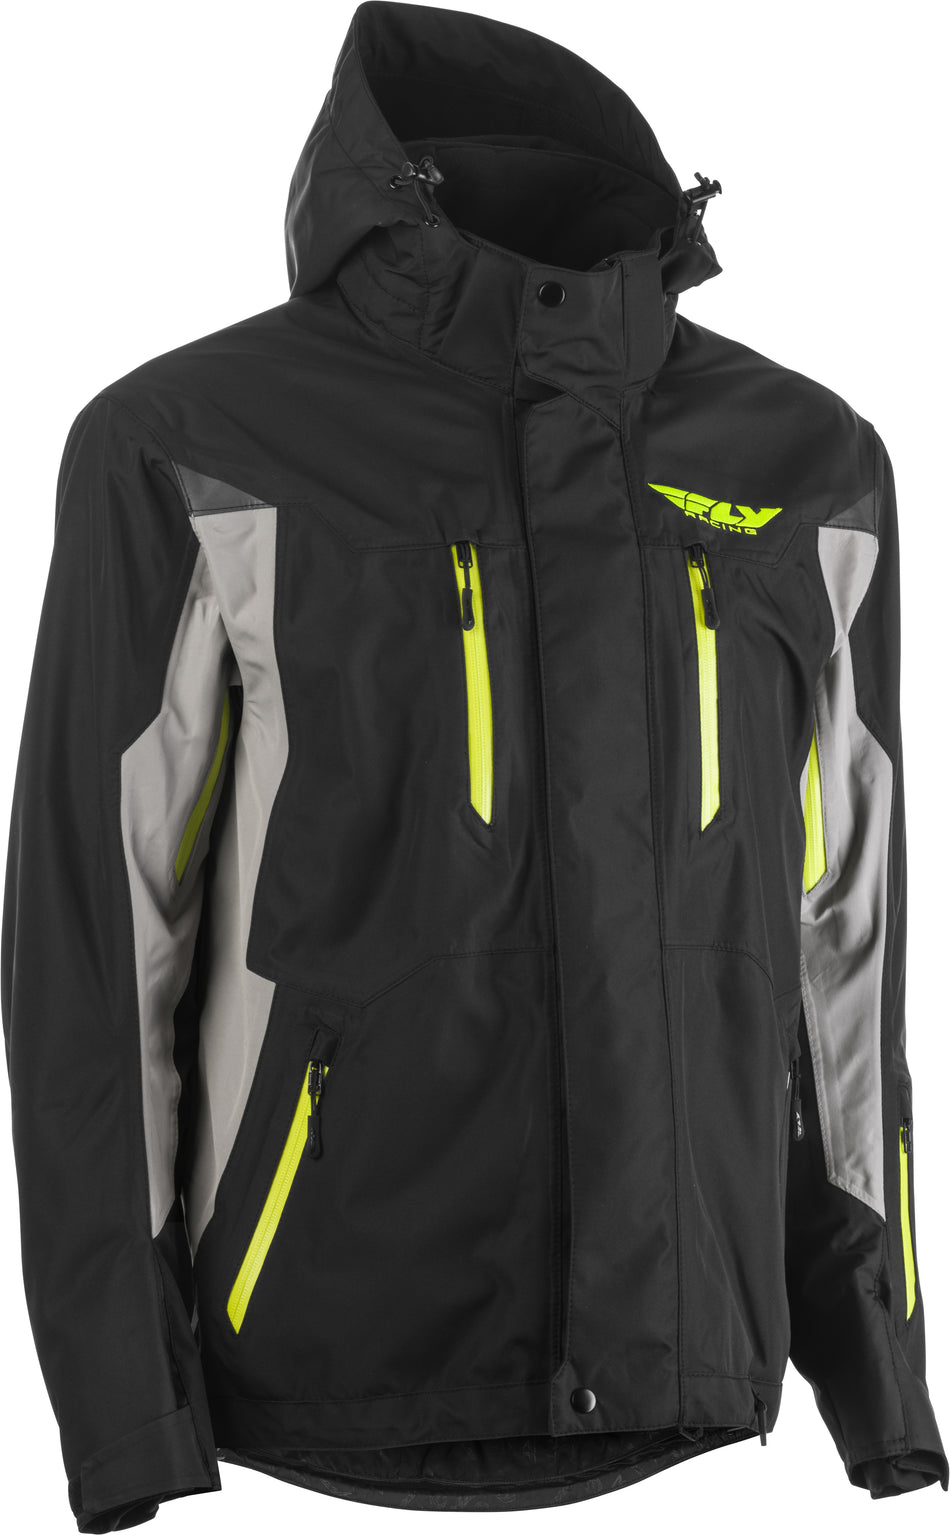 FLY RACING Fly Incline Jacket Grey/Black Lg 470-4102L